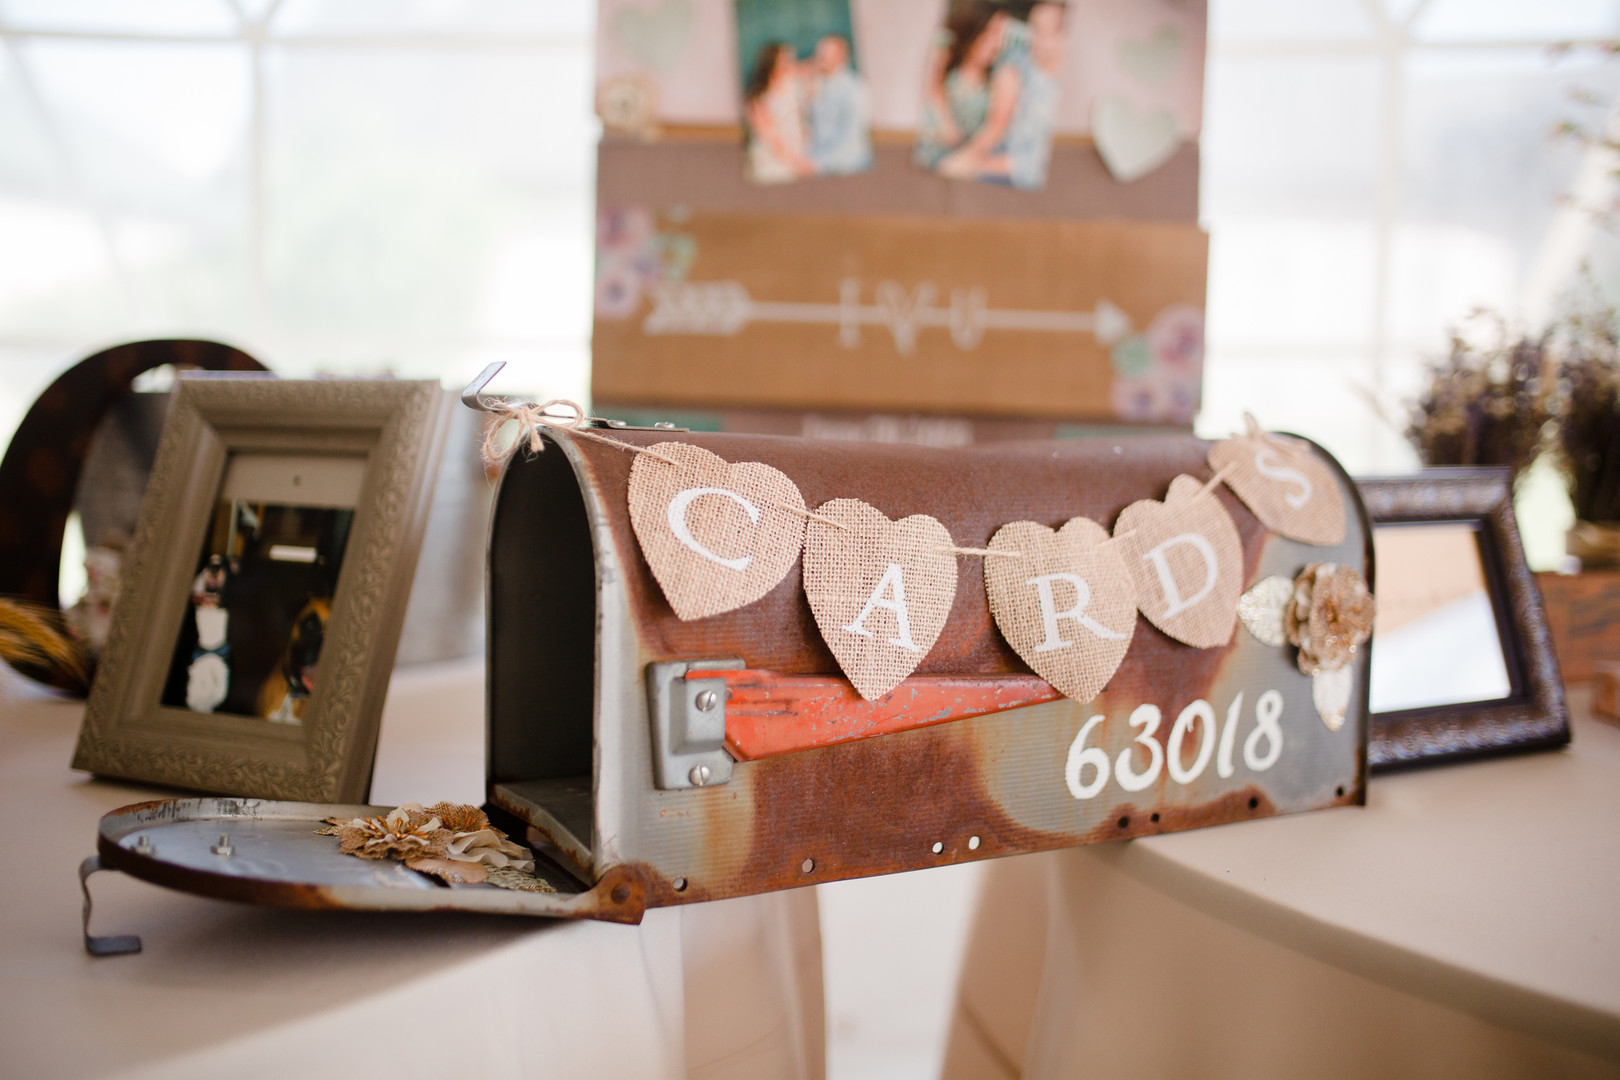 Wedding card table: Rustic country wedding in Minooka, IL captured by Katie Brsan Photography. Visit CHItheeWED.com for more wedding inspiration!